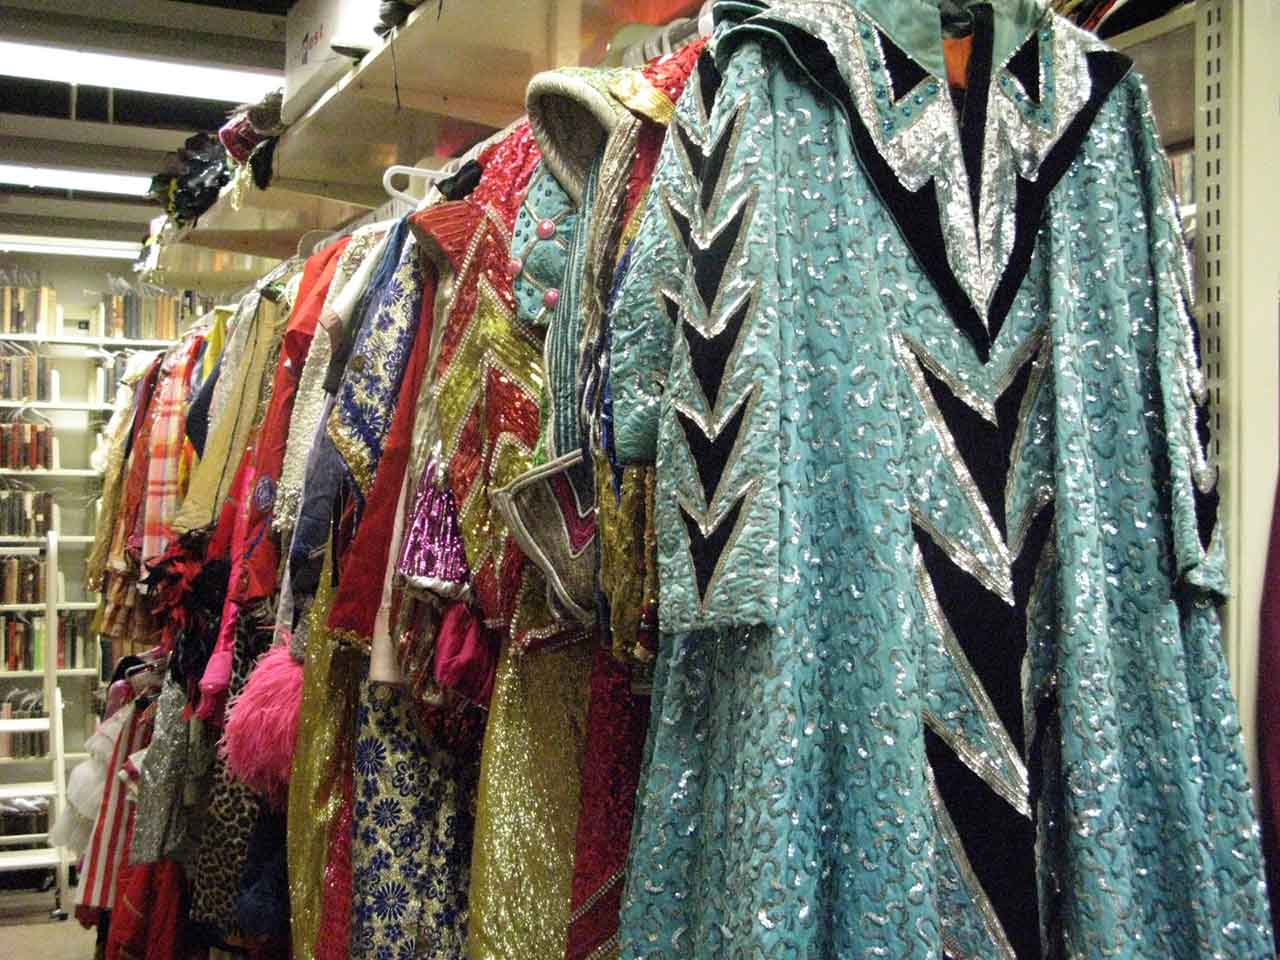 Glittery costumes hanging on a rack